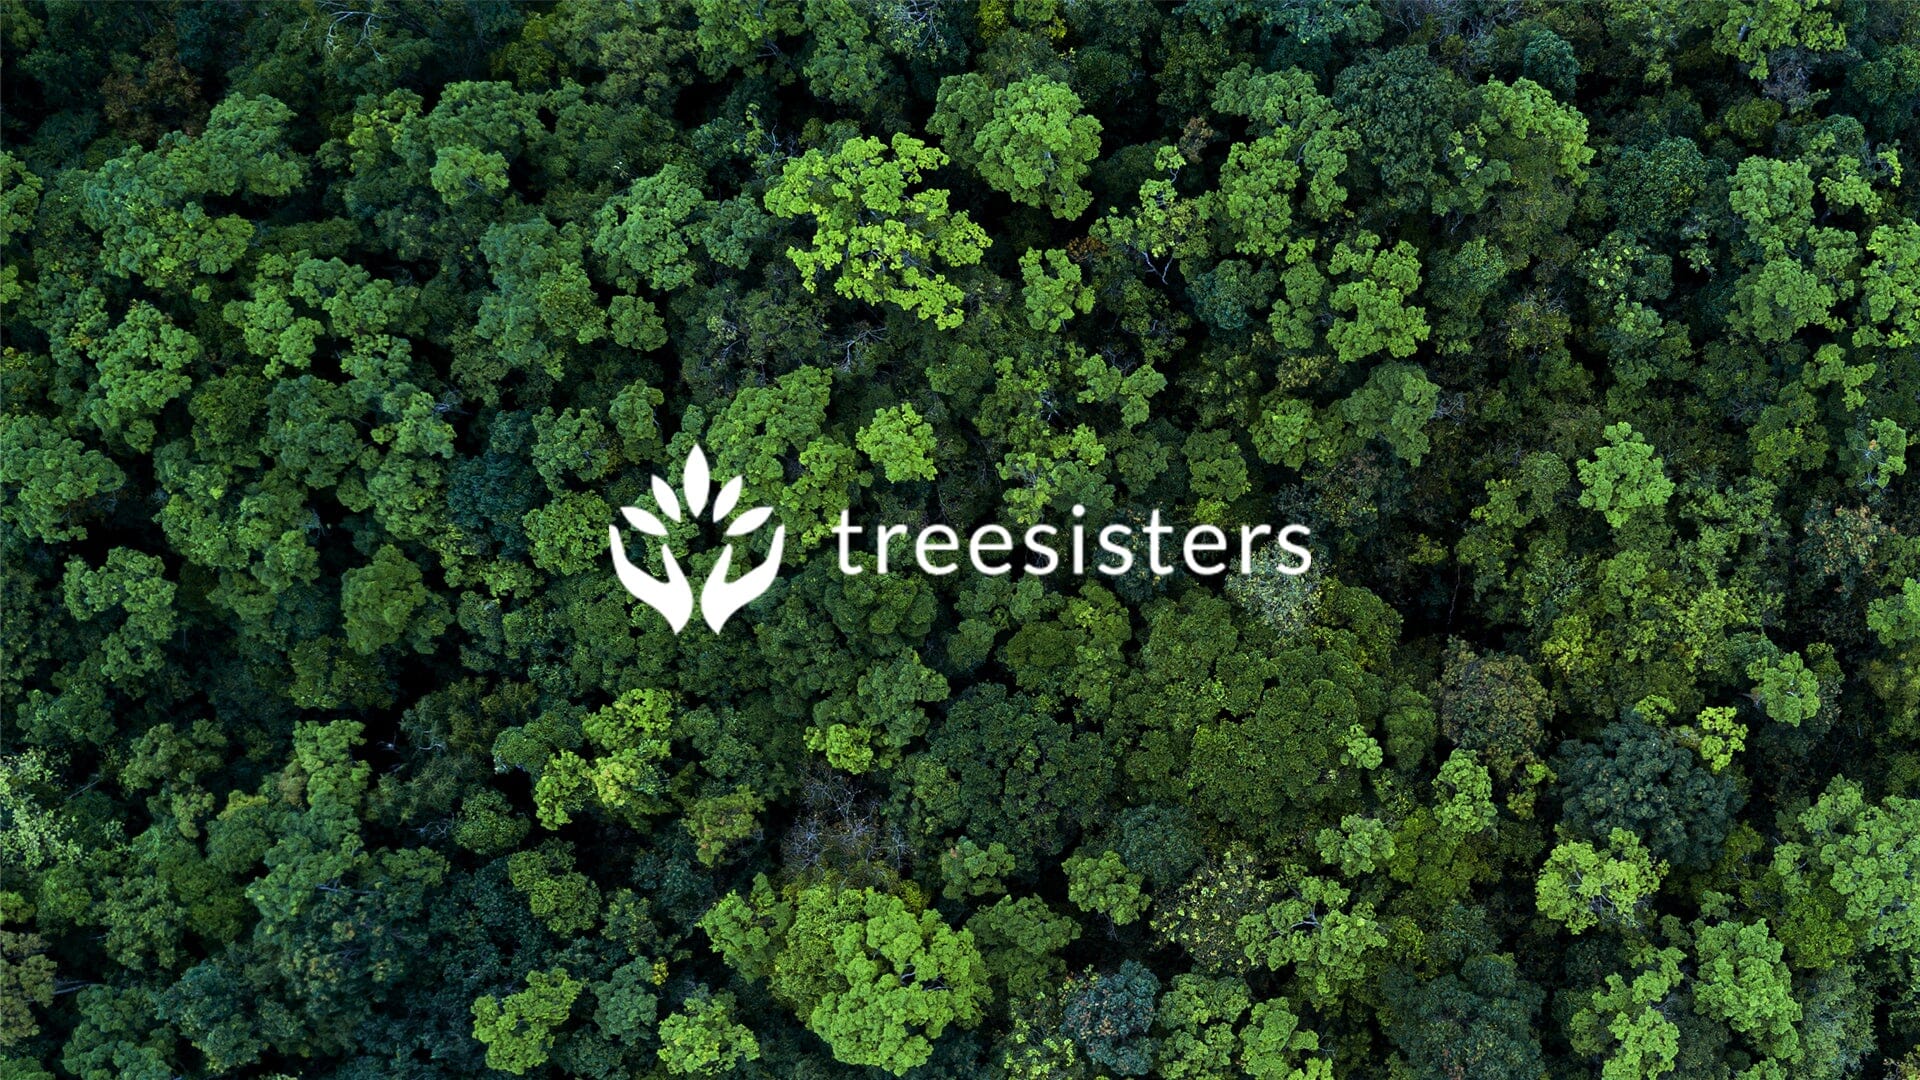 Supporting Global Reforestation & Women’s Empowerment with TreeSisters